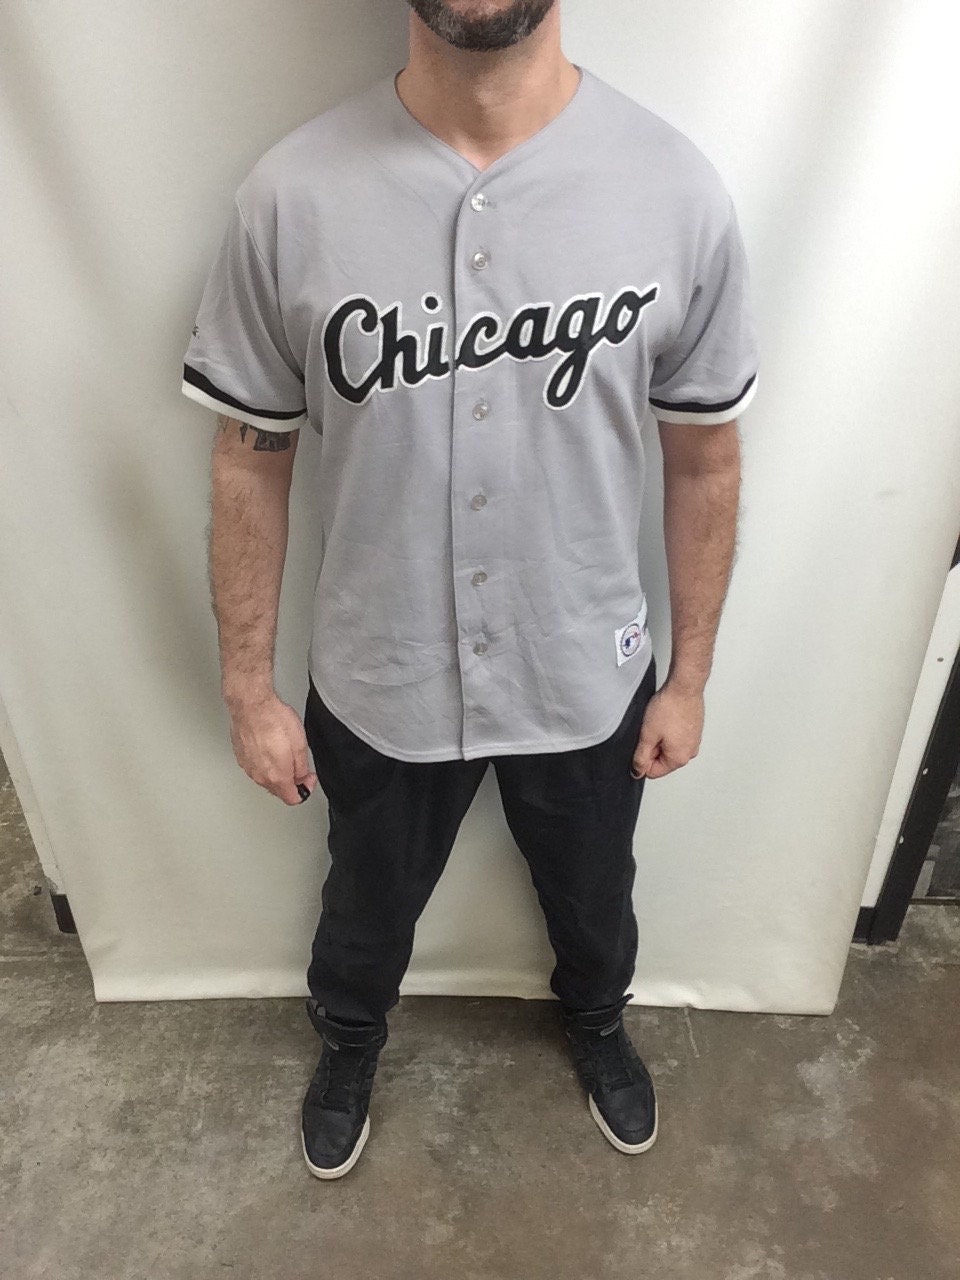 60% OFF Majestic MLB Throwback Jerseys — Sneaker Shouts